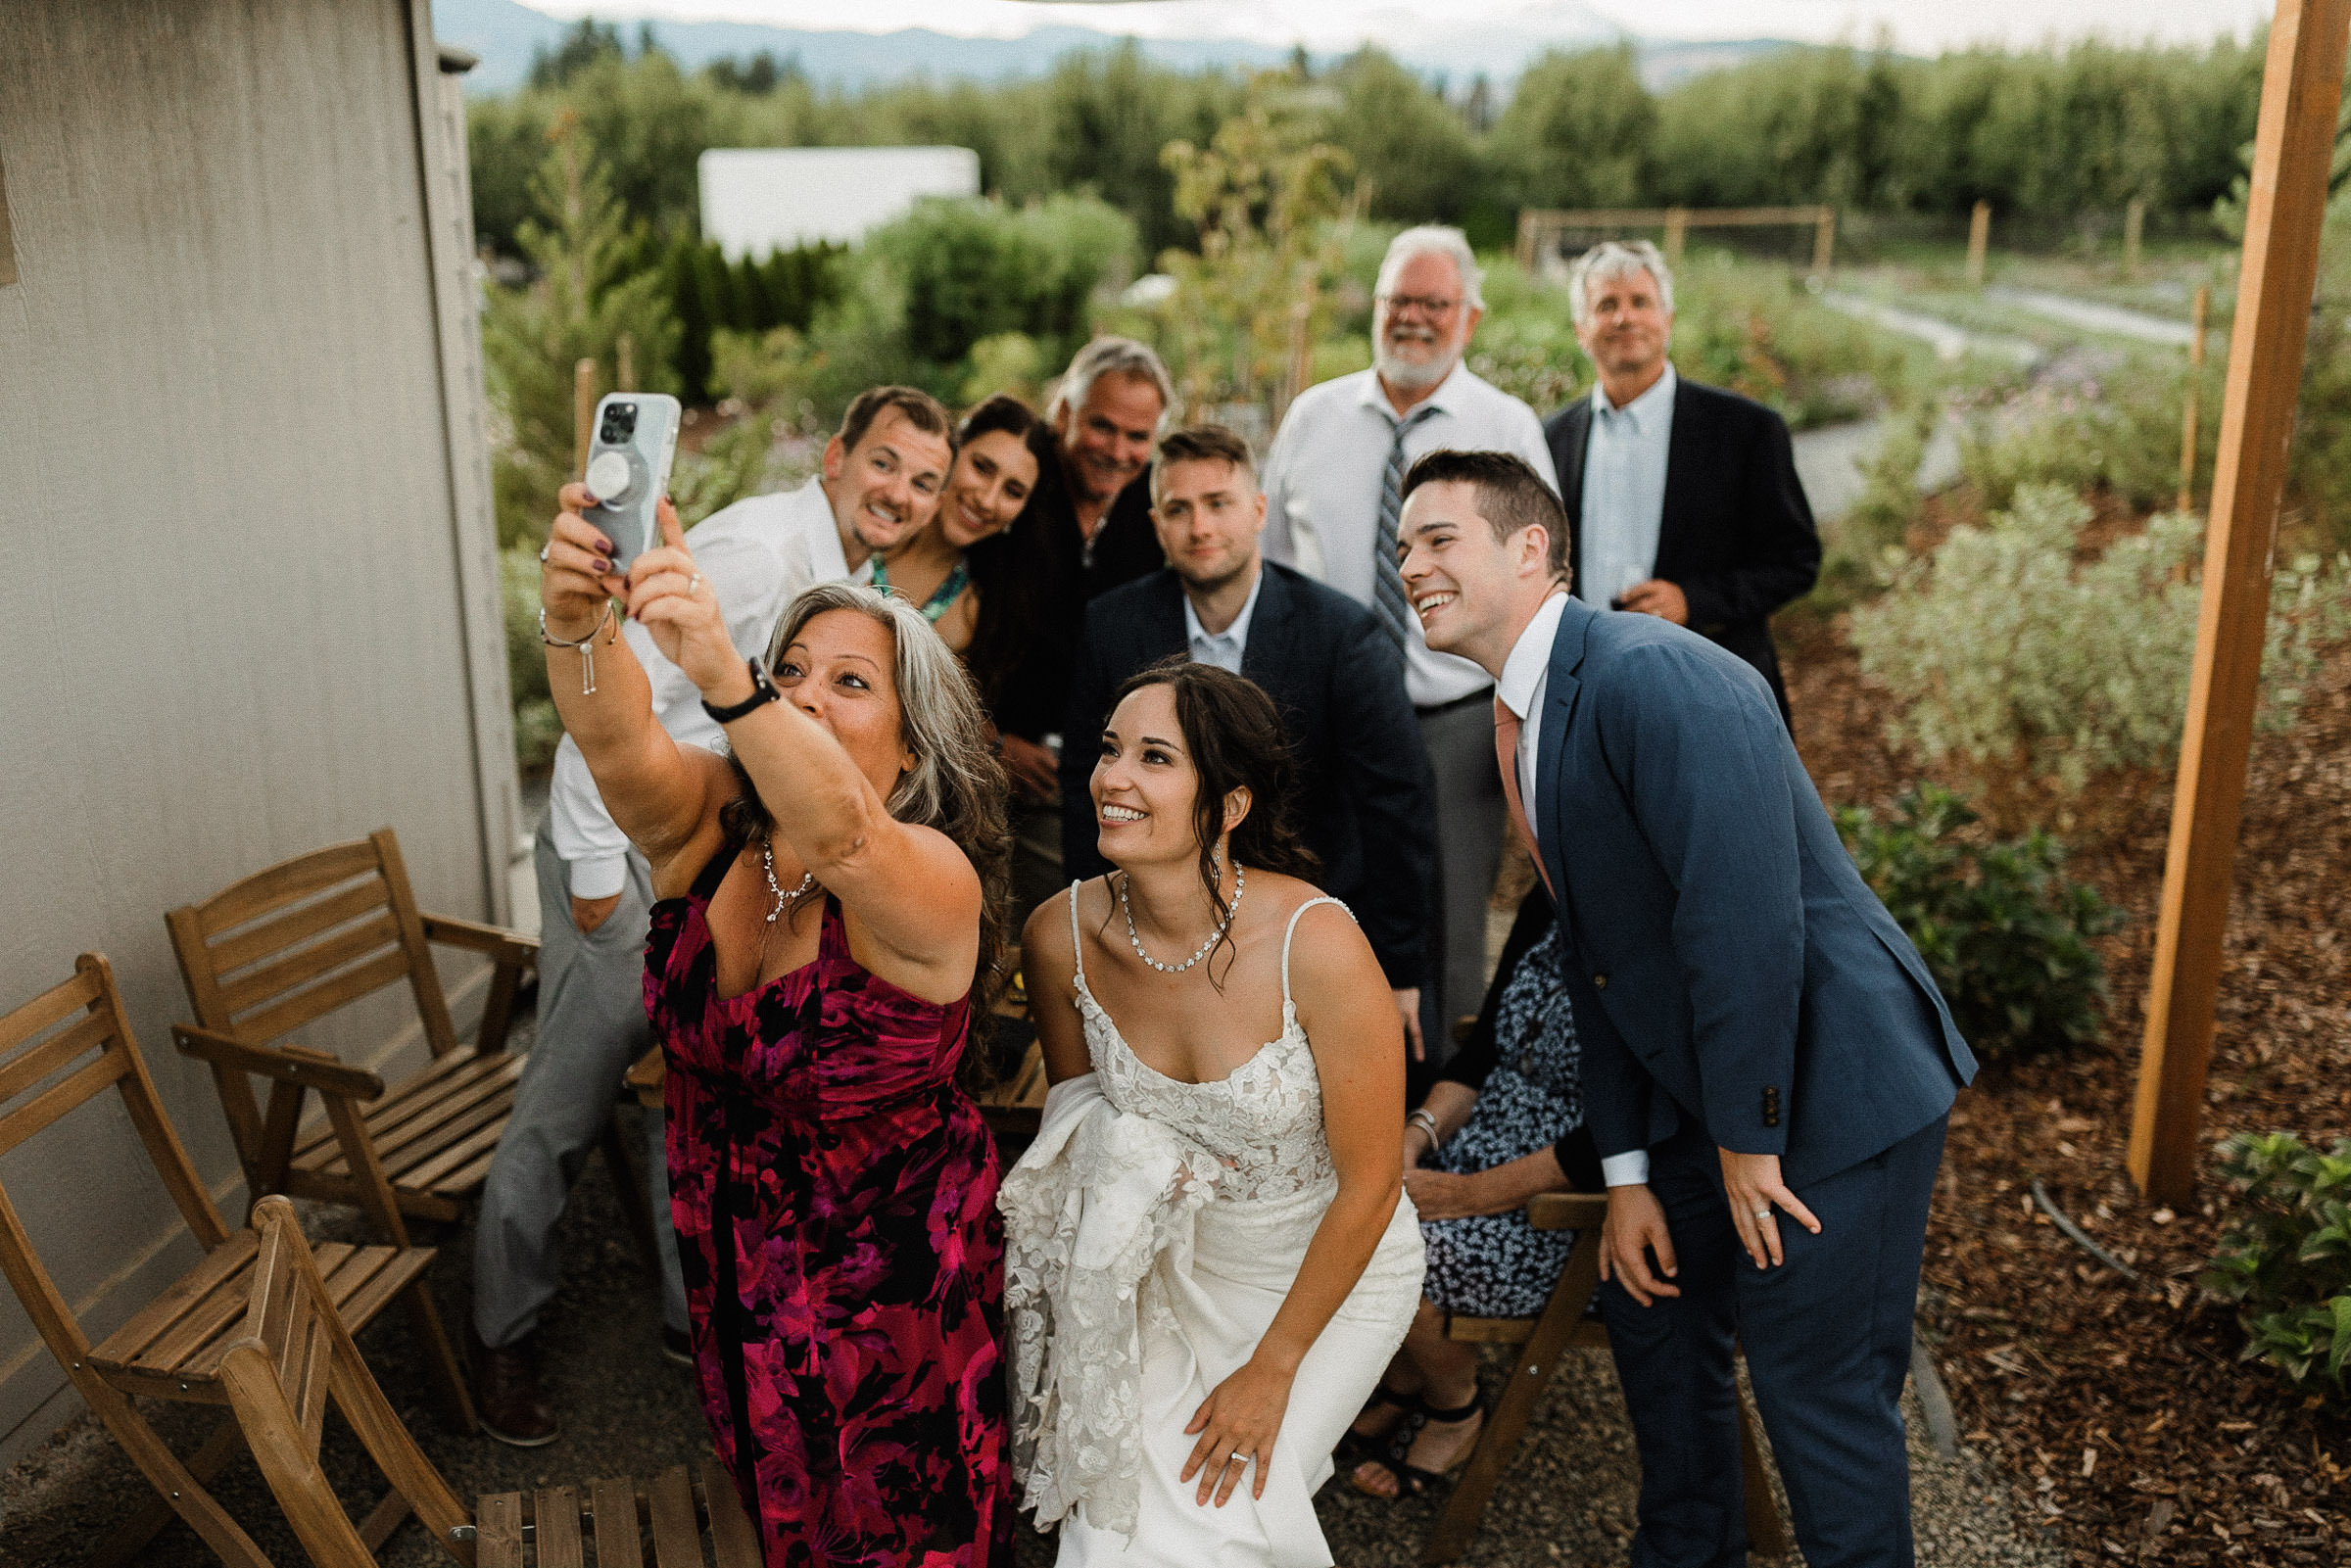 Bride, groom, and seven guests squeeze together and pose for a selfie